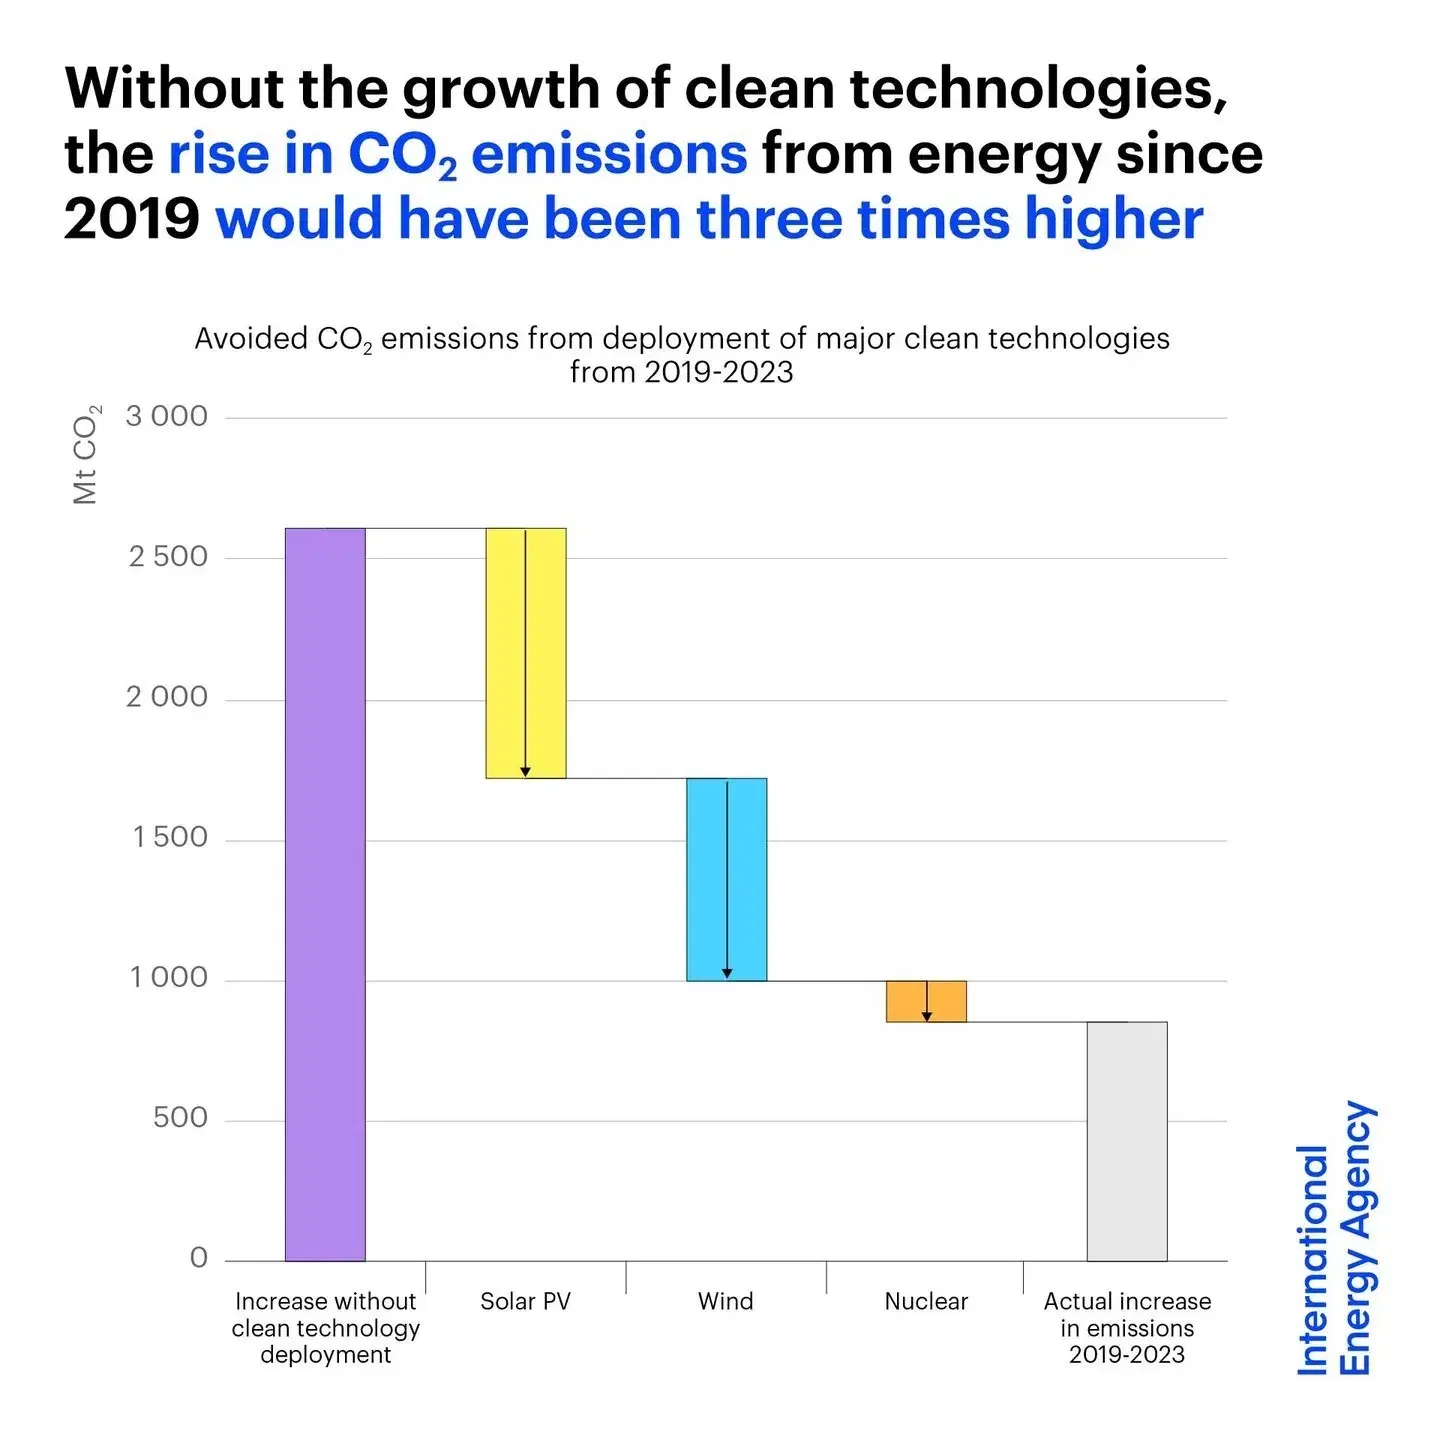 Clean Technologies and Avoided CO2 Emissions